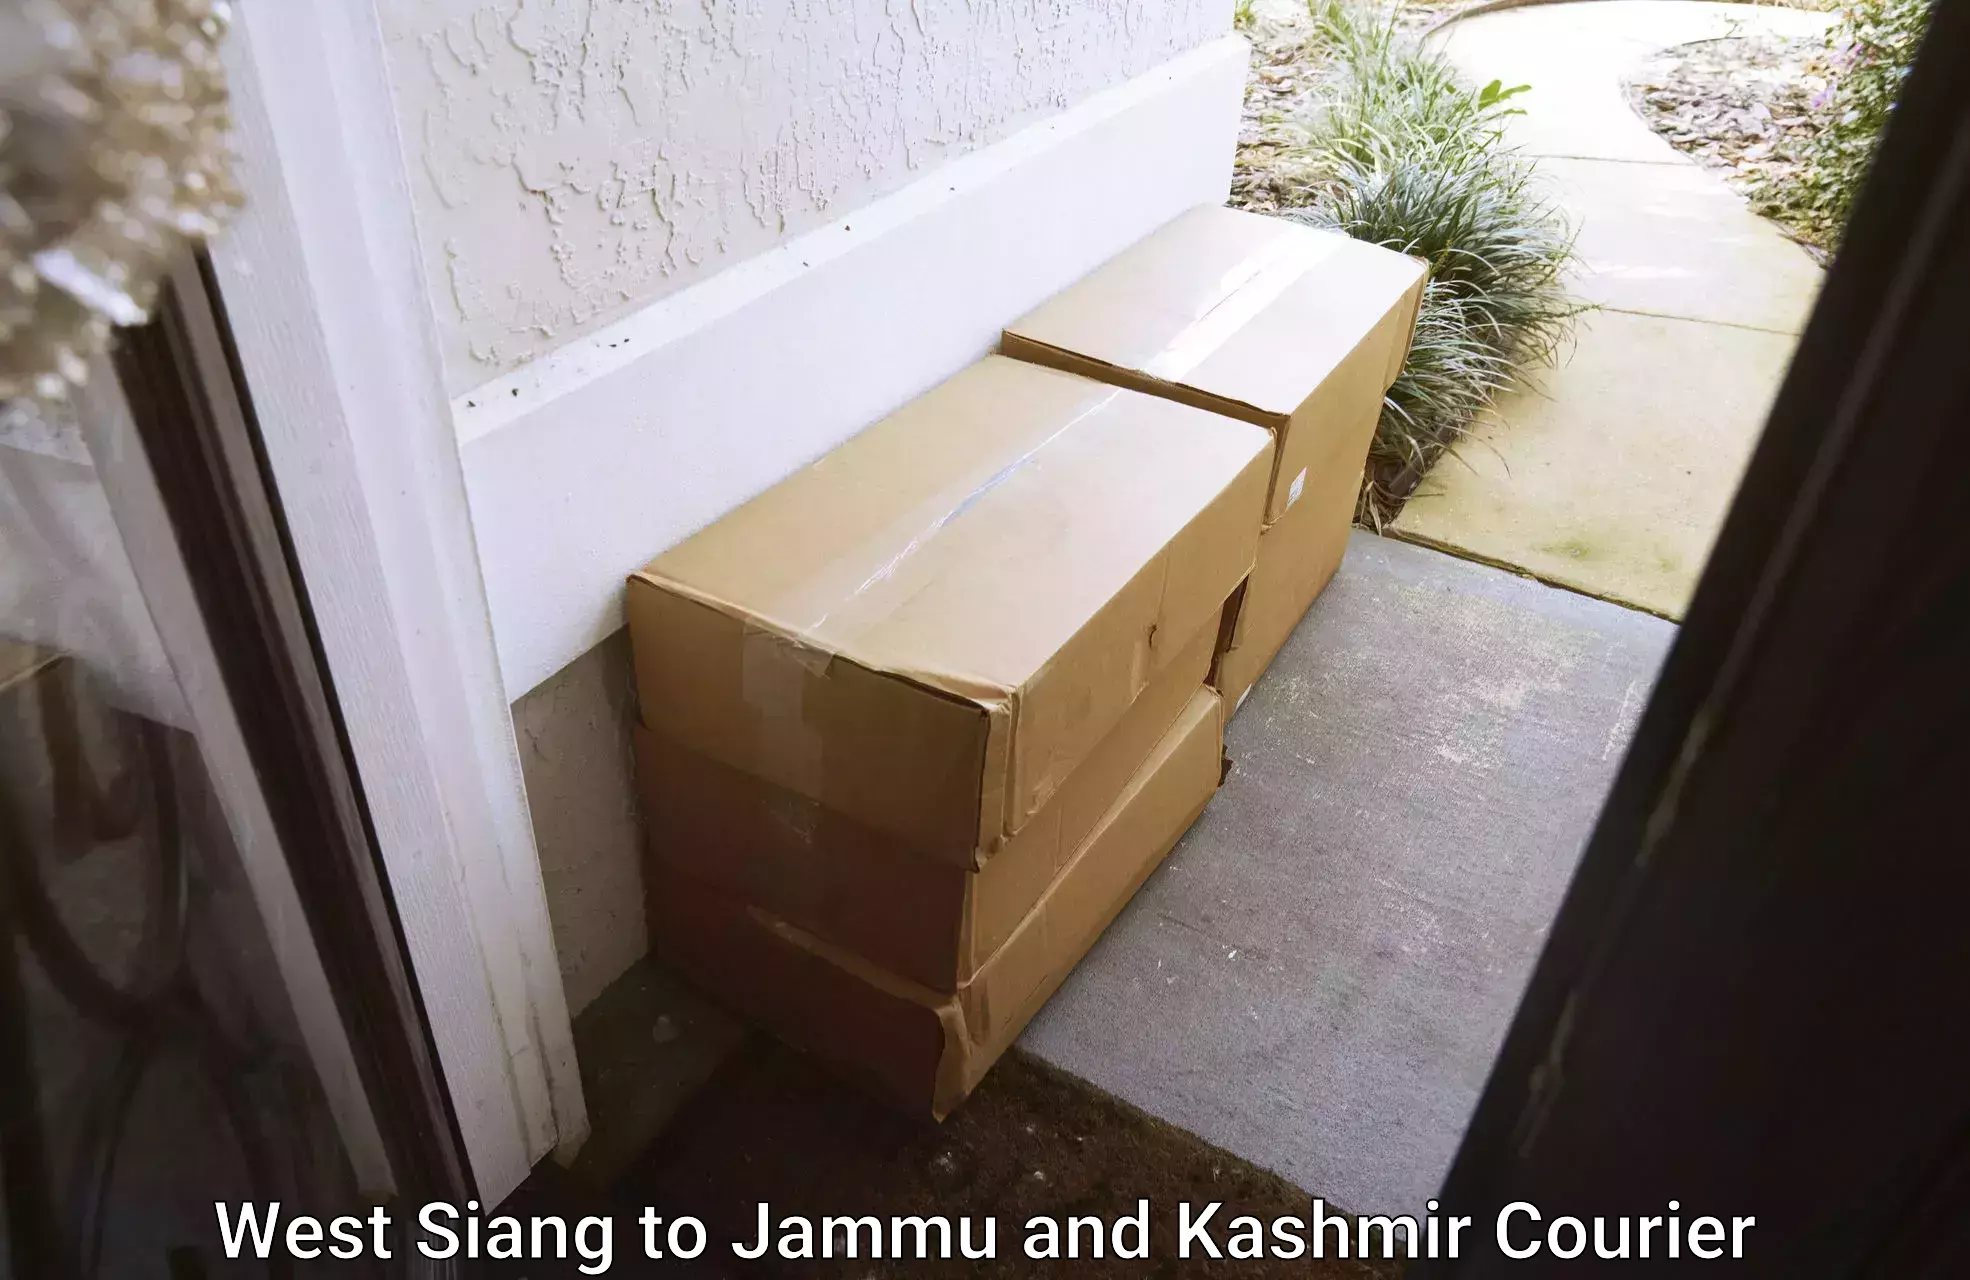 Subscription-based courier West Siang to Udhampur